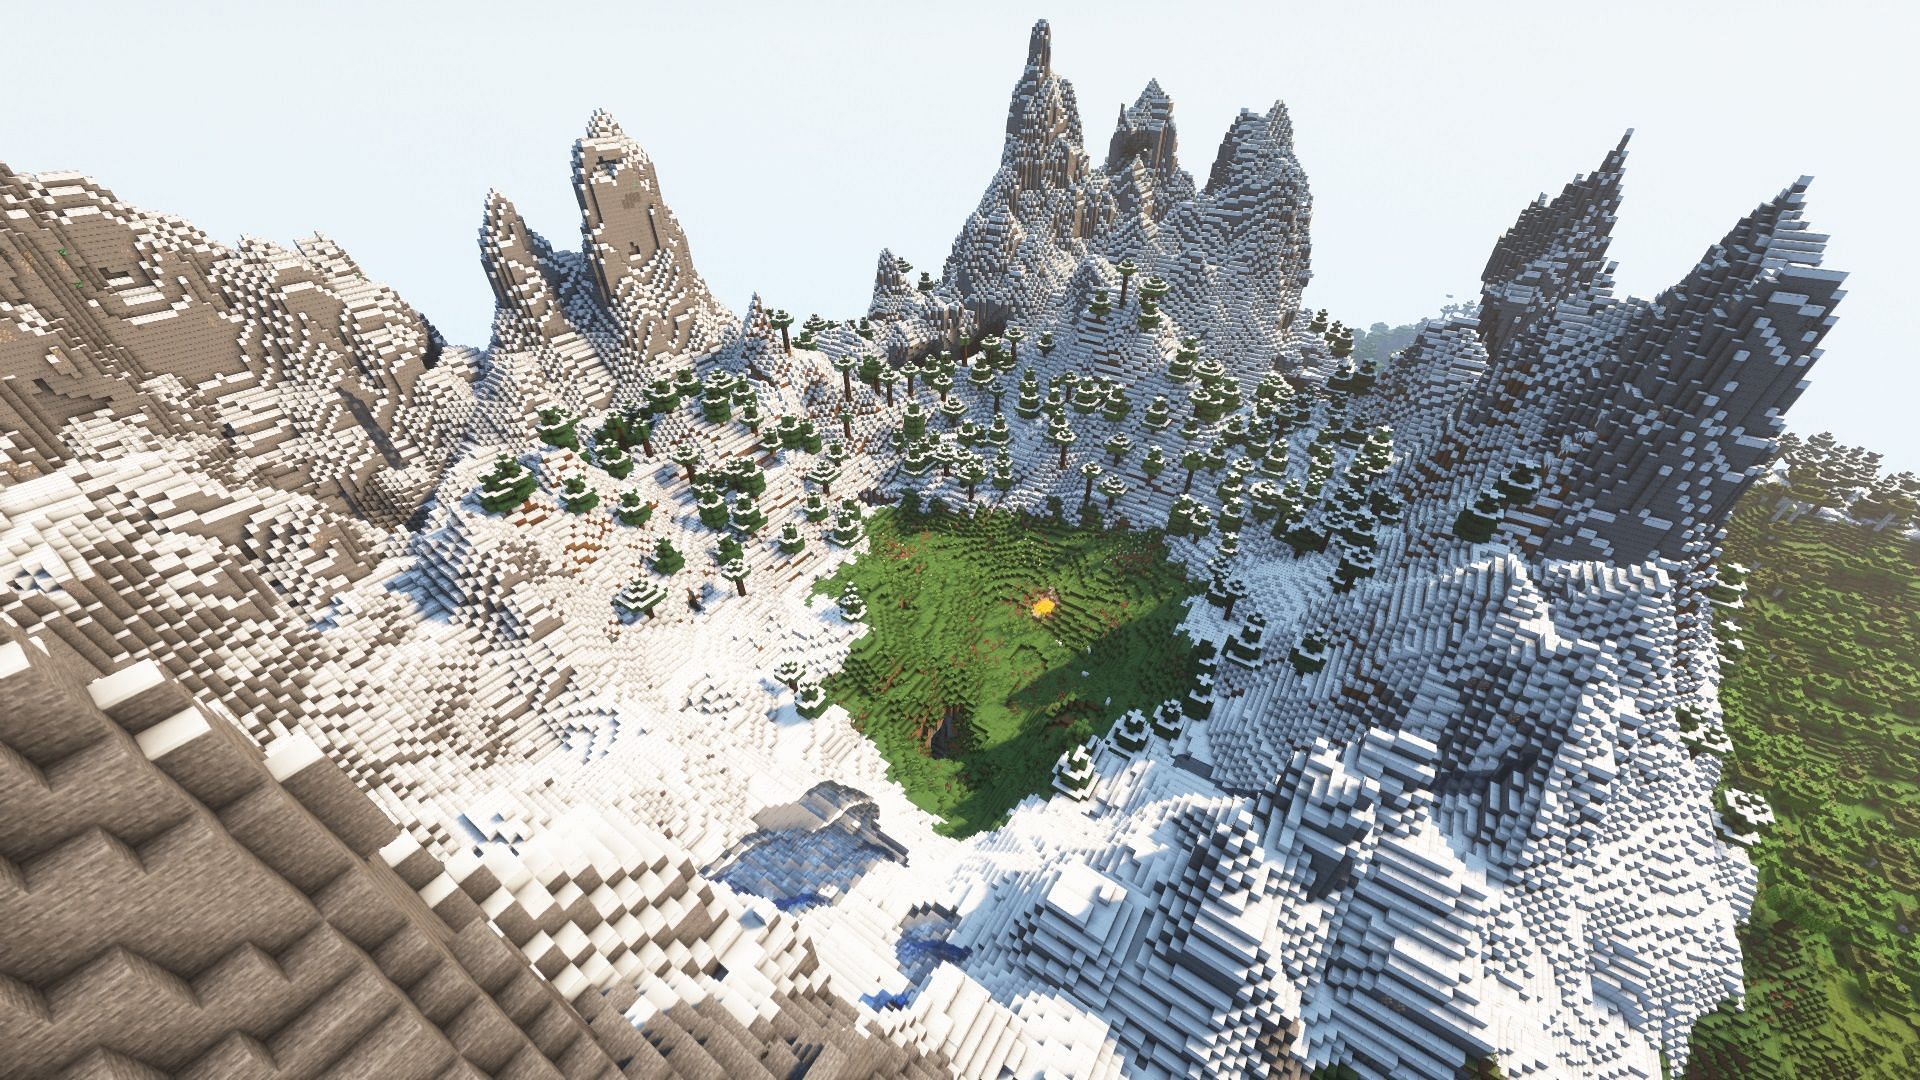 Small plains biome area surrounded by tall mountains (Image via Mojang)